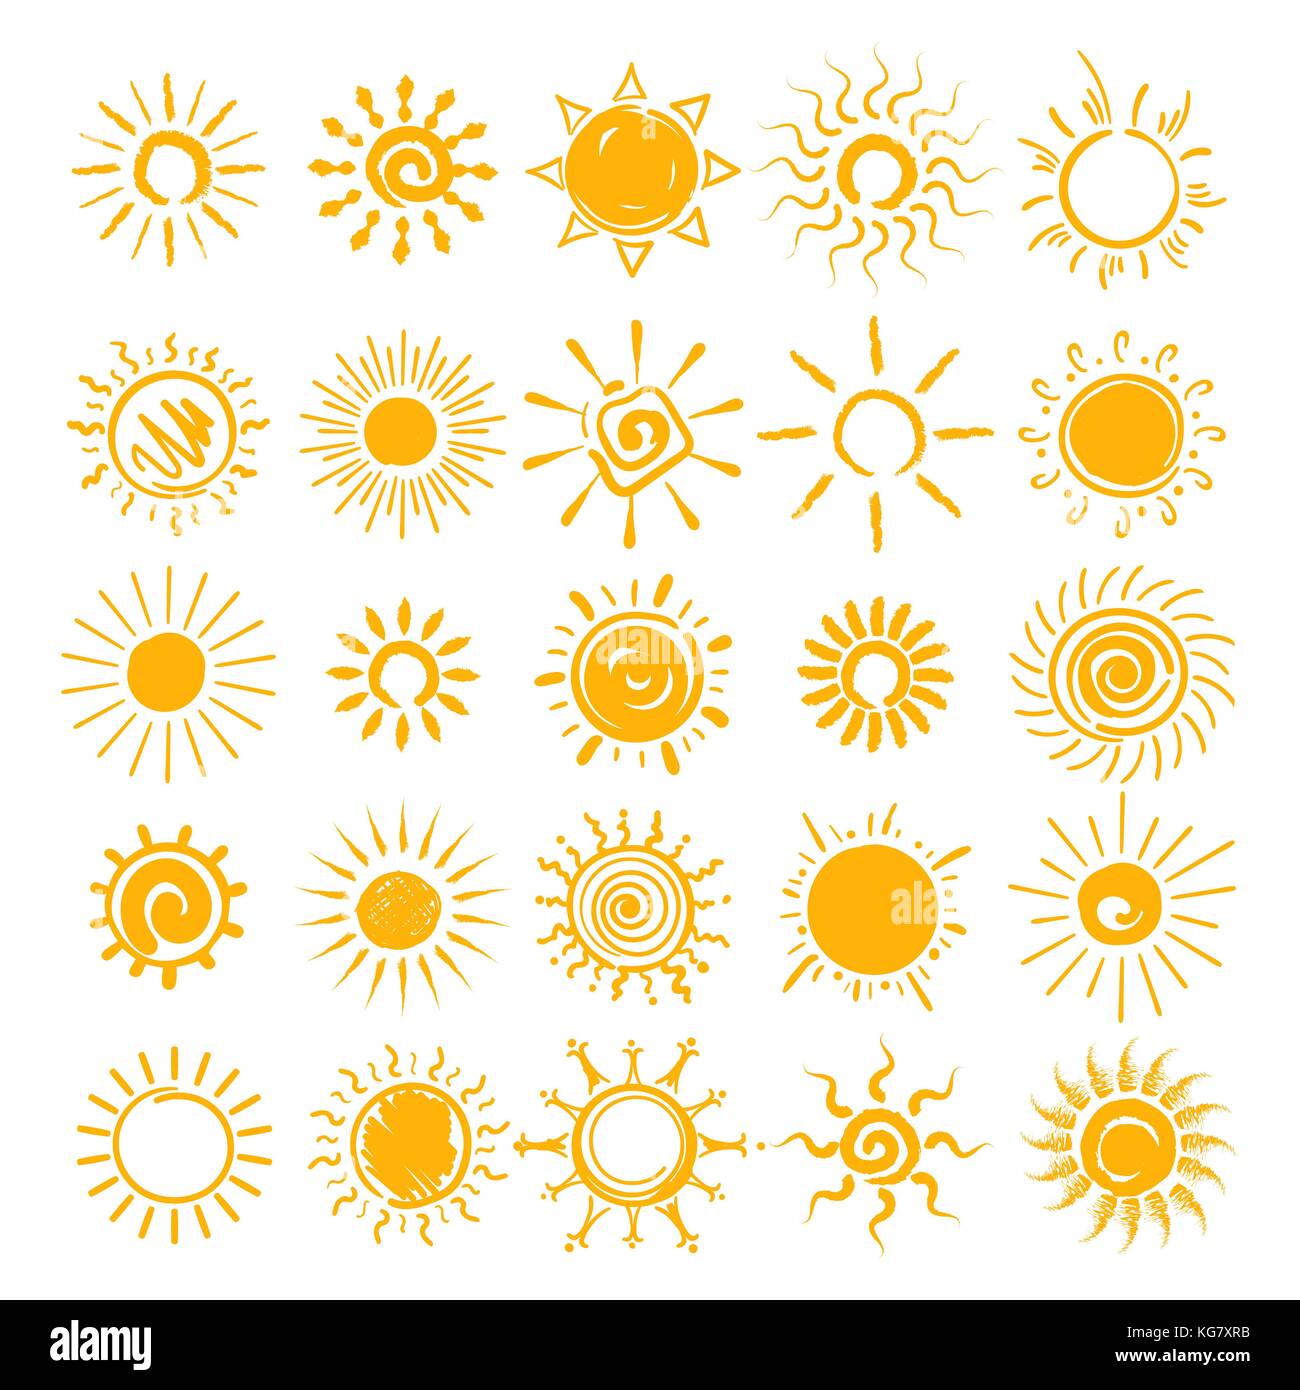 Sun illustration. Vector hands drawn sun icons, doodle cartoon morning summer sketch suns isolated on white background Stock Vector